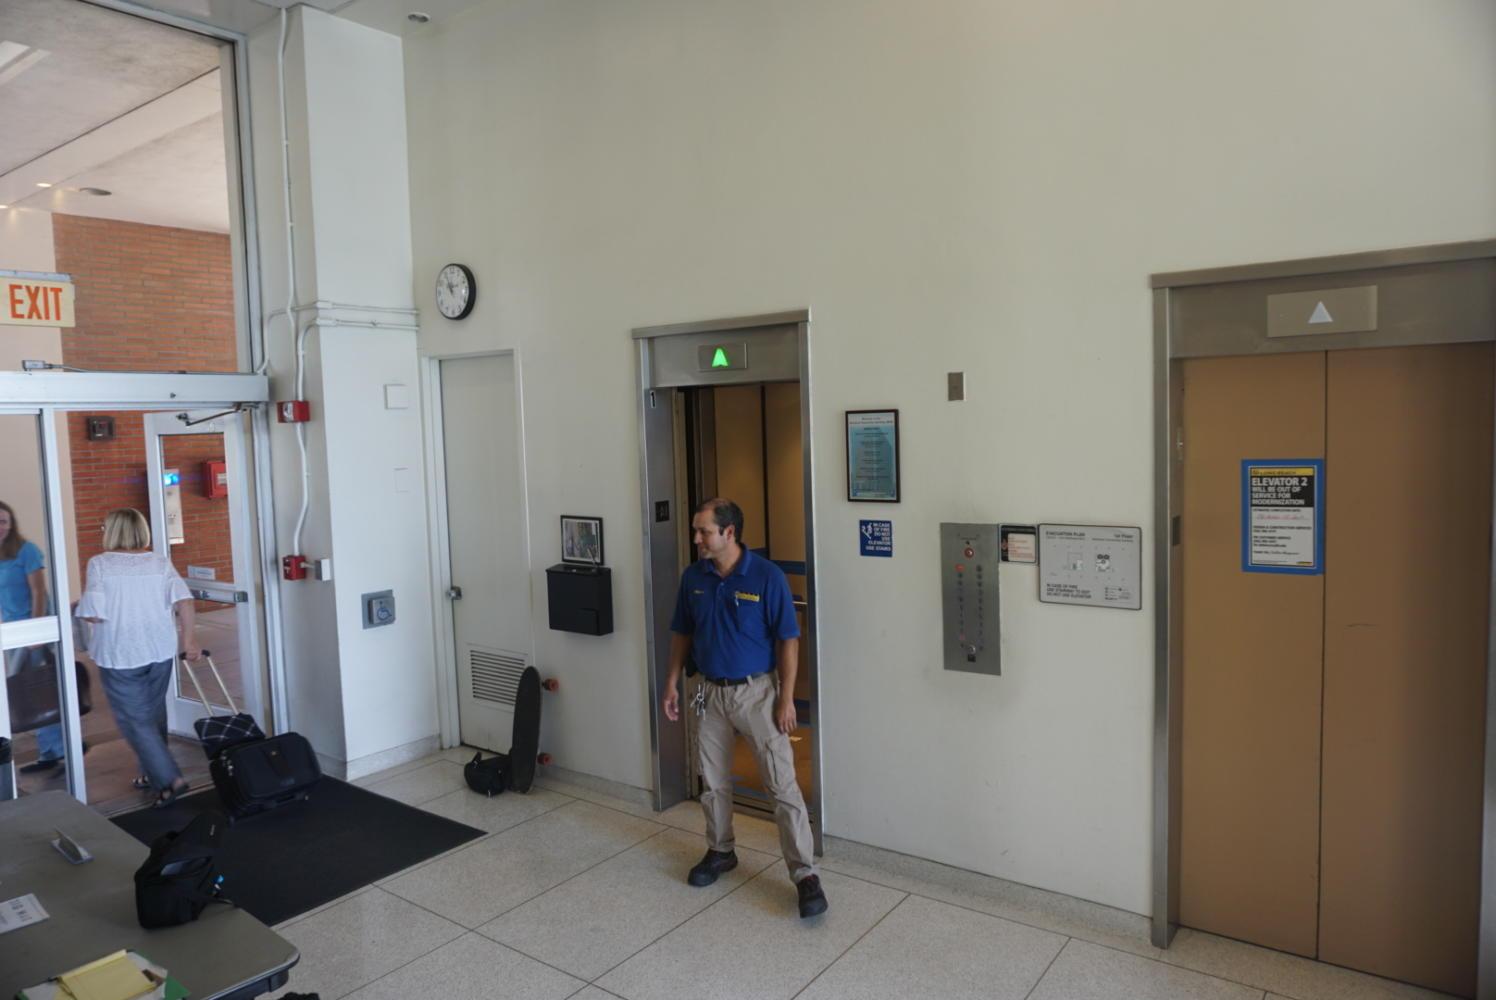 The elevator located in the Macintosh Building on Upper Campus now features an attendant in charge of riding with passengers.